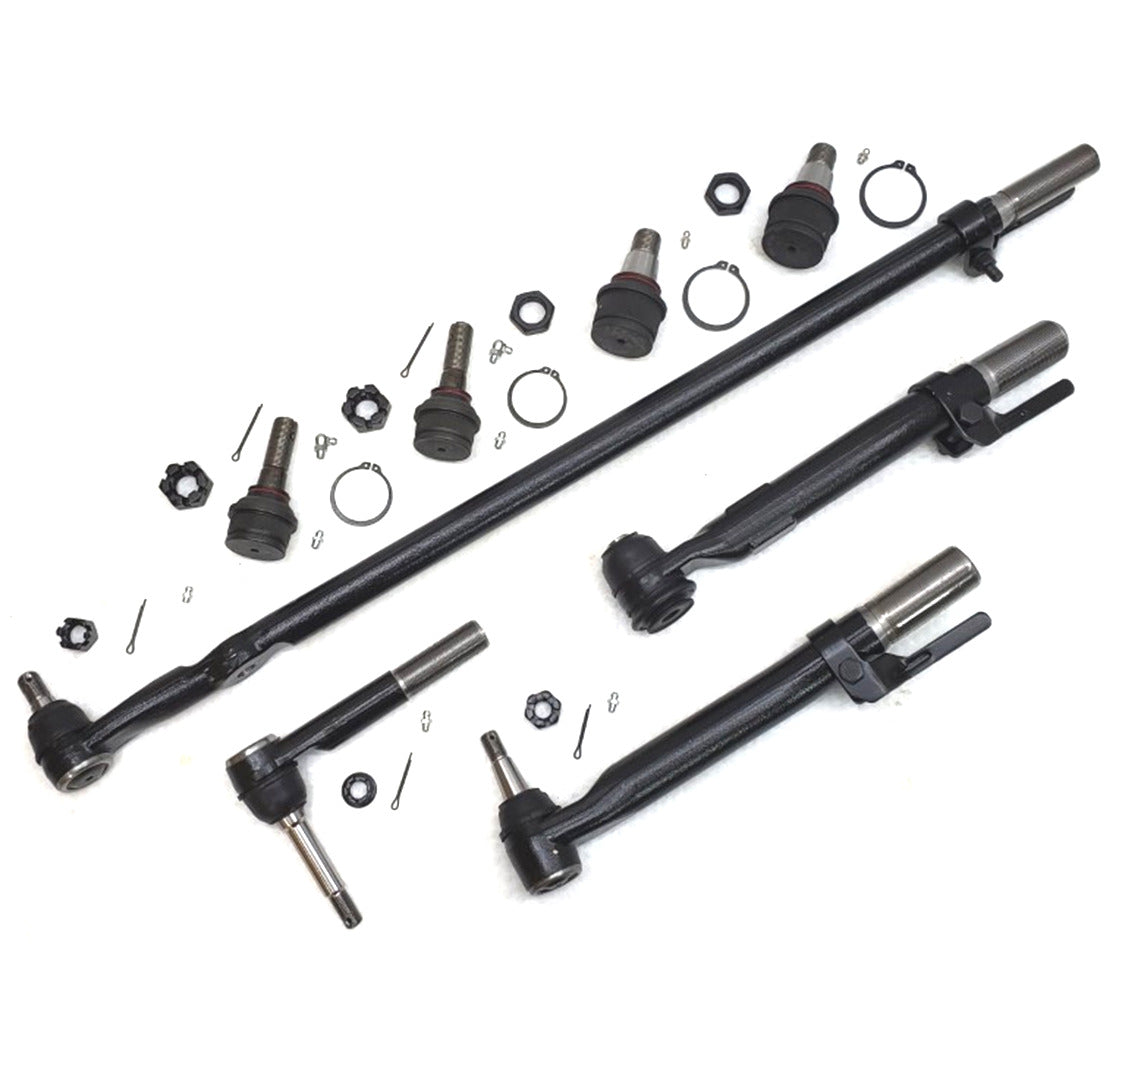 Ford F250 F350 4x4 2008 - 2010 XRF Ball Joint Tie Rod Drag Link Steering Kit